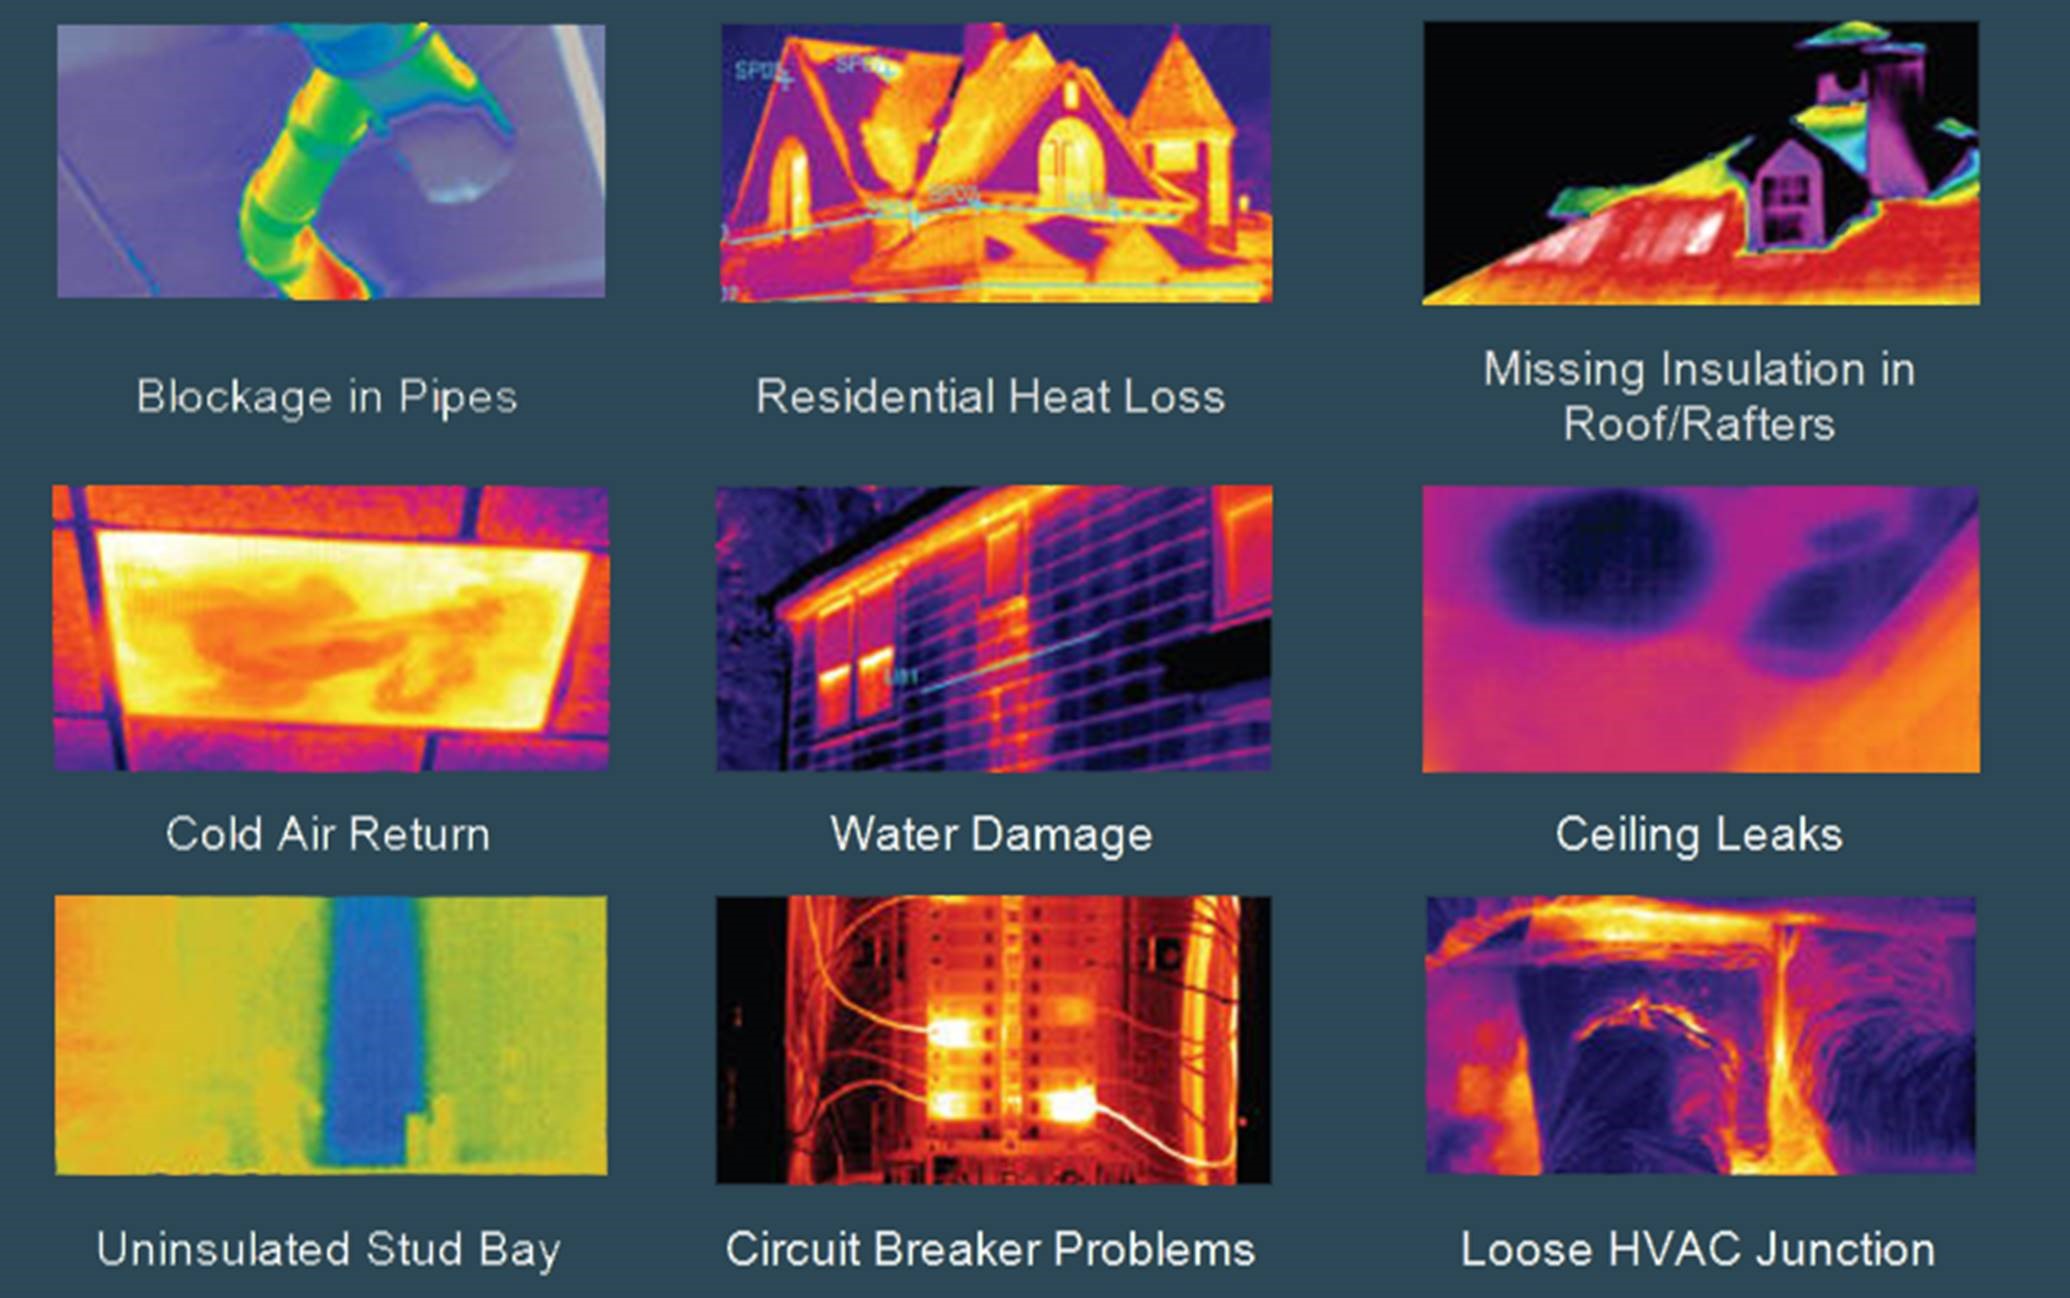 I used this thermal camera to identify heat loss in my home